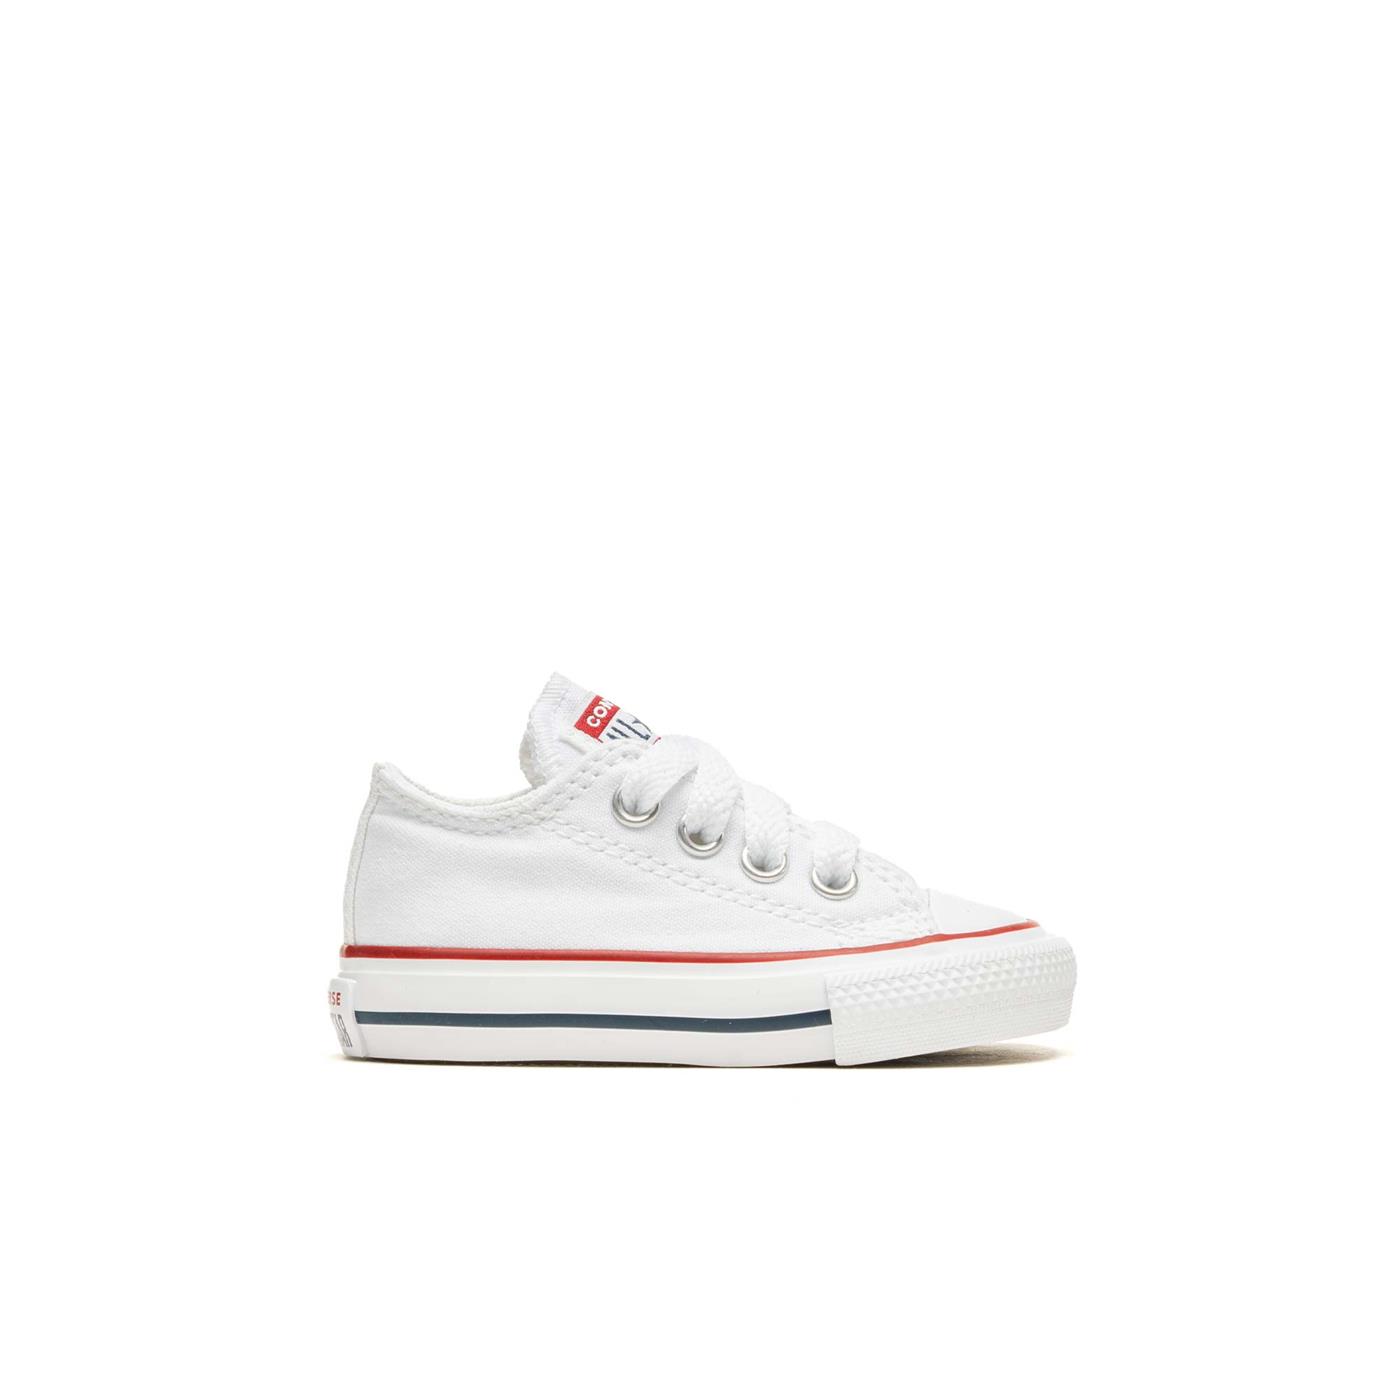 Sneakers CONVERSE Chuck Taylor All Star Ox White for | Kеды converse taylor all утеплённые | CourslanguesShops | 7J256C